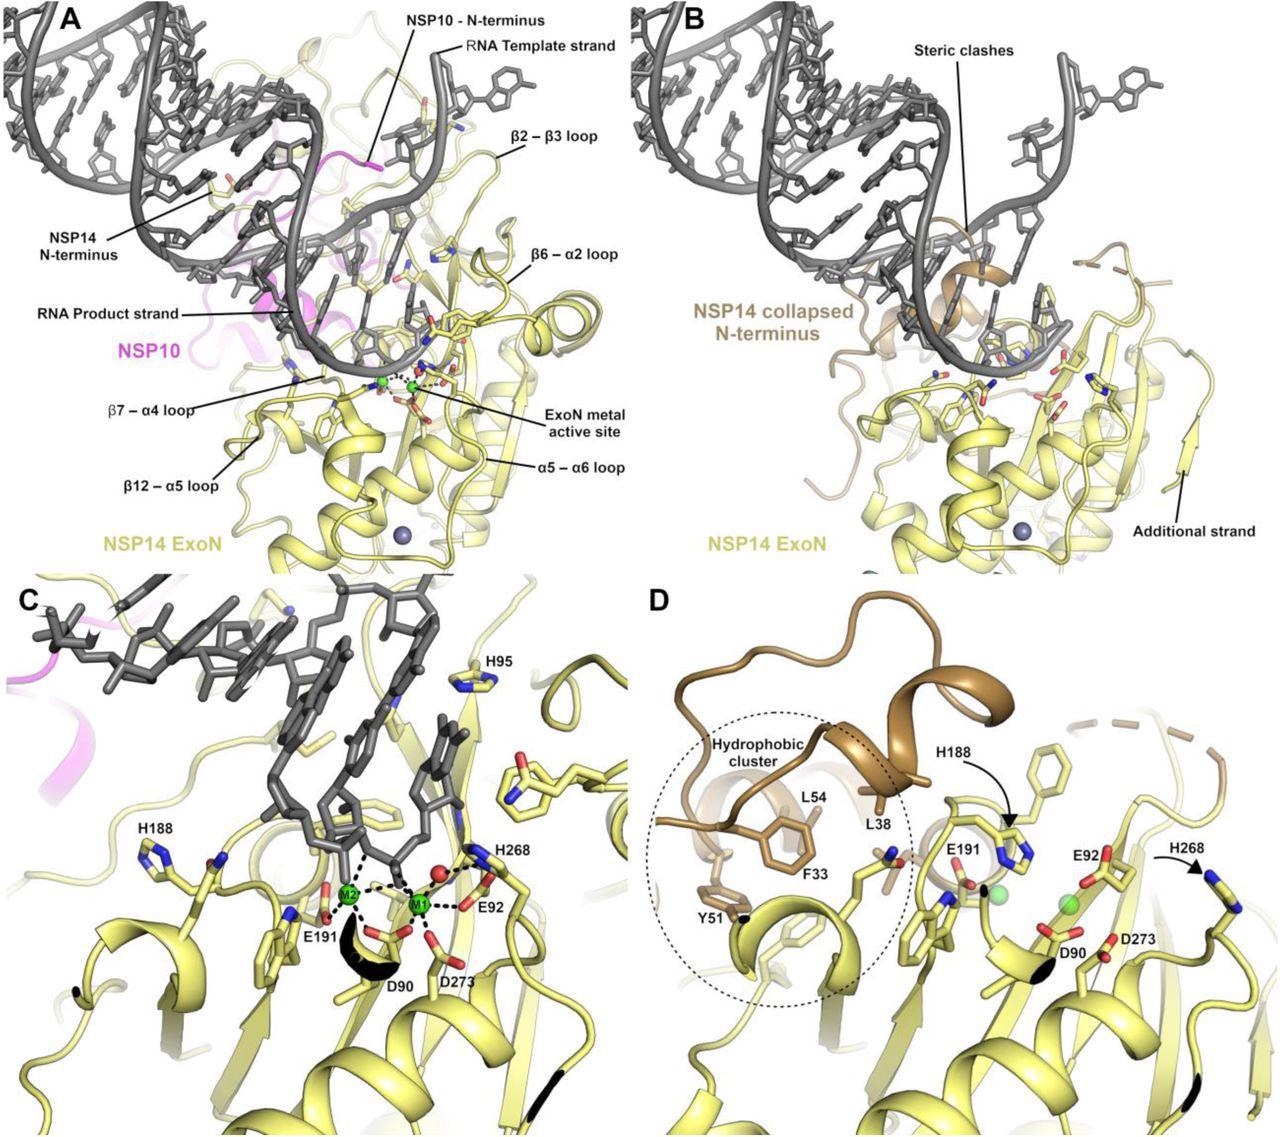 The NSP14 ExoN active site is formed upon binding to NSP10. (A) View of the ExoN domain of the NSP14 NSP10 complex bound to a mismatch containing double-stranded RNA molecule as recently solved by cryo EM9. Key residues in the catalytic center are shown in the stick format and the secondary structure elements that form the wider active site are labeled. (B) View of the NSP14 ExoN domain in the absence of NSP10, the mismatch containing RNA is shown for reference and forms significant steric clashes with residues that constitute the collapsed N-terminus (shown in sand color). (C) Zoomed-in view of the active site catalytic center of the NSP14 NSP10 RNA complex with metal ion coordinating residues labeled. (D) NSP14 in the absence of NSP10 viewed from the same orientation. A hydrophobic cluster adjacent to the active site (shown in Sand color) flips H188 into a position where it likely disrupts the binding of M2 (shown for reference as semitransparent green spheres).